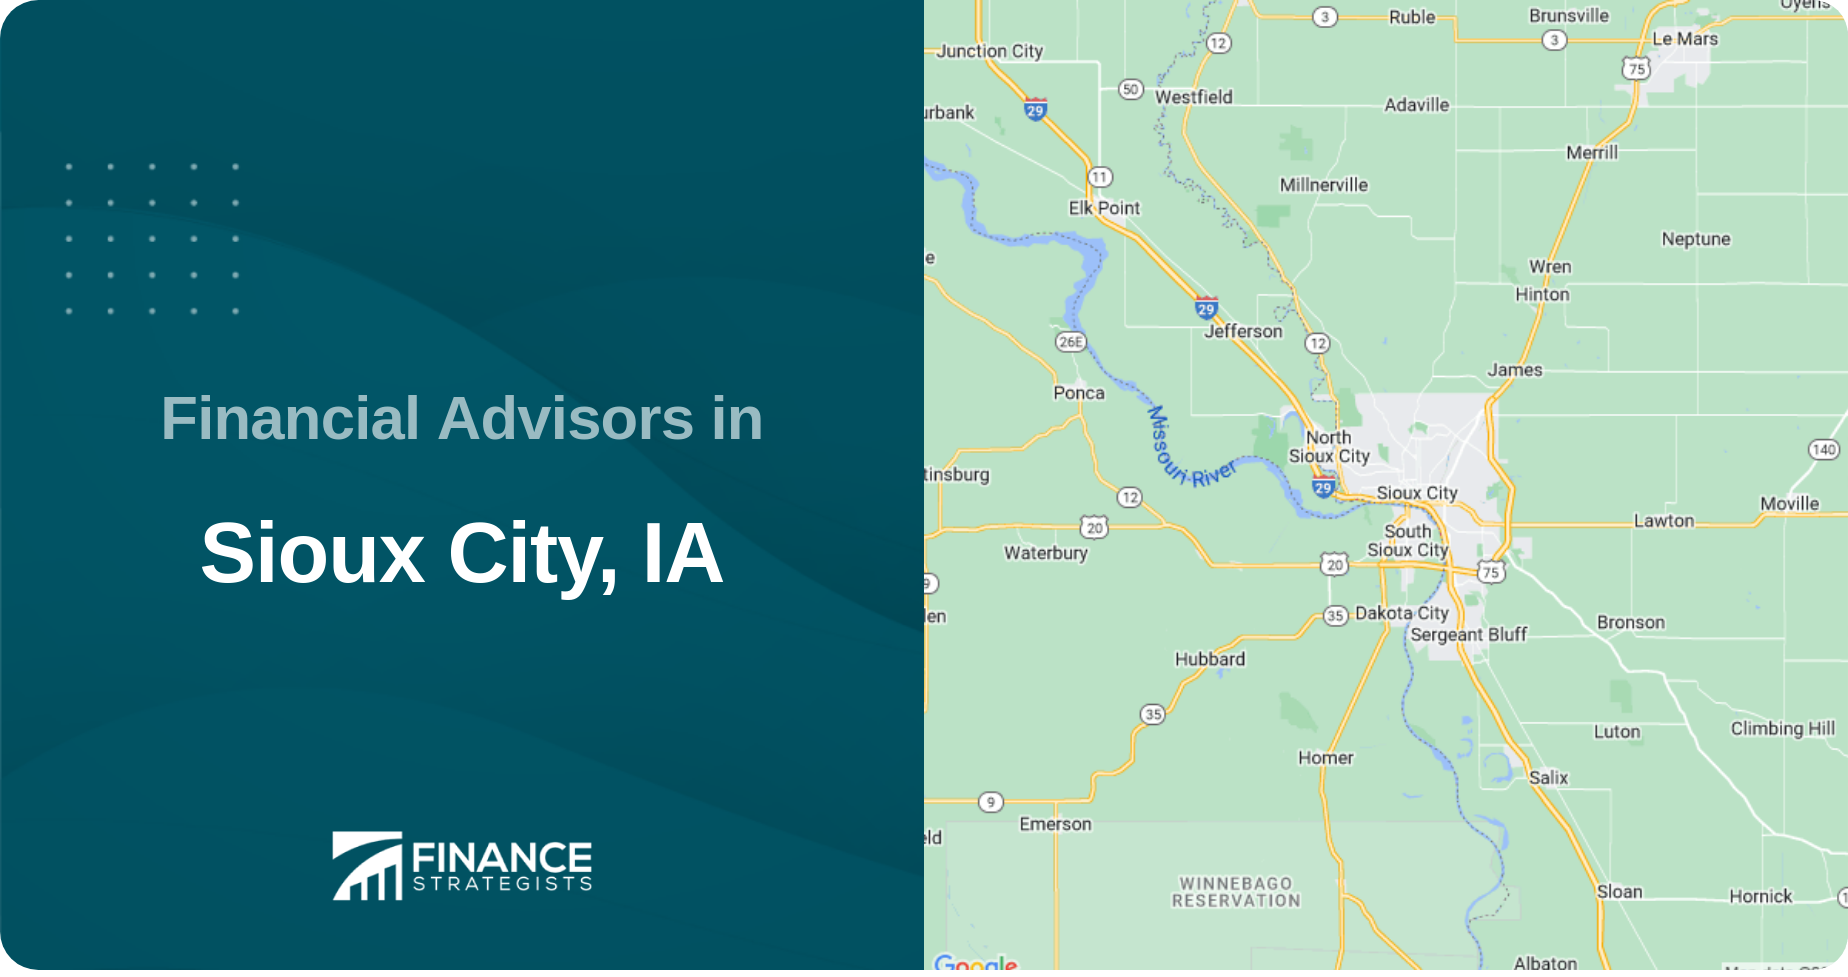 Financial Advisors in Sioux City, IA